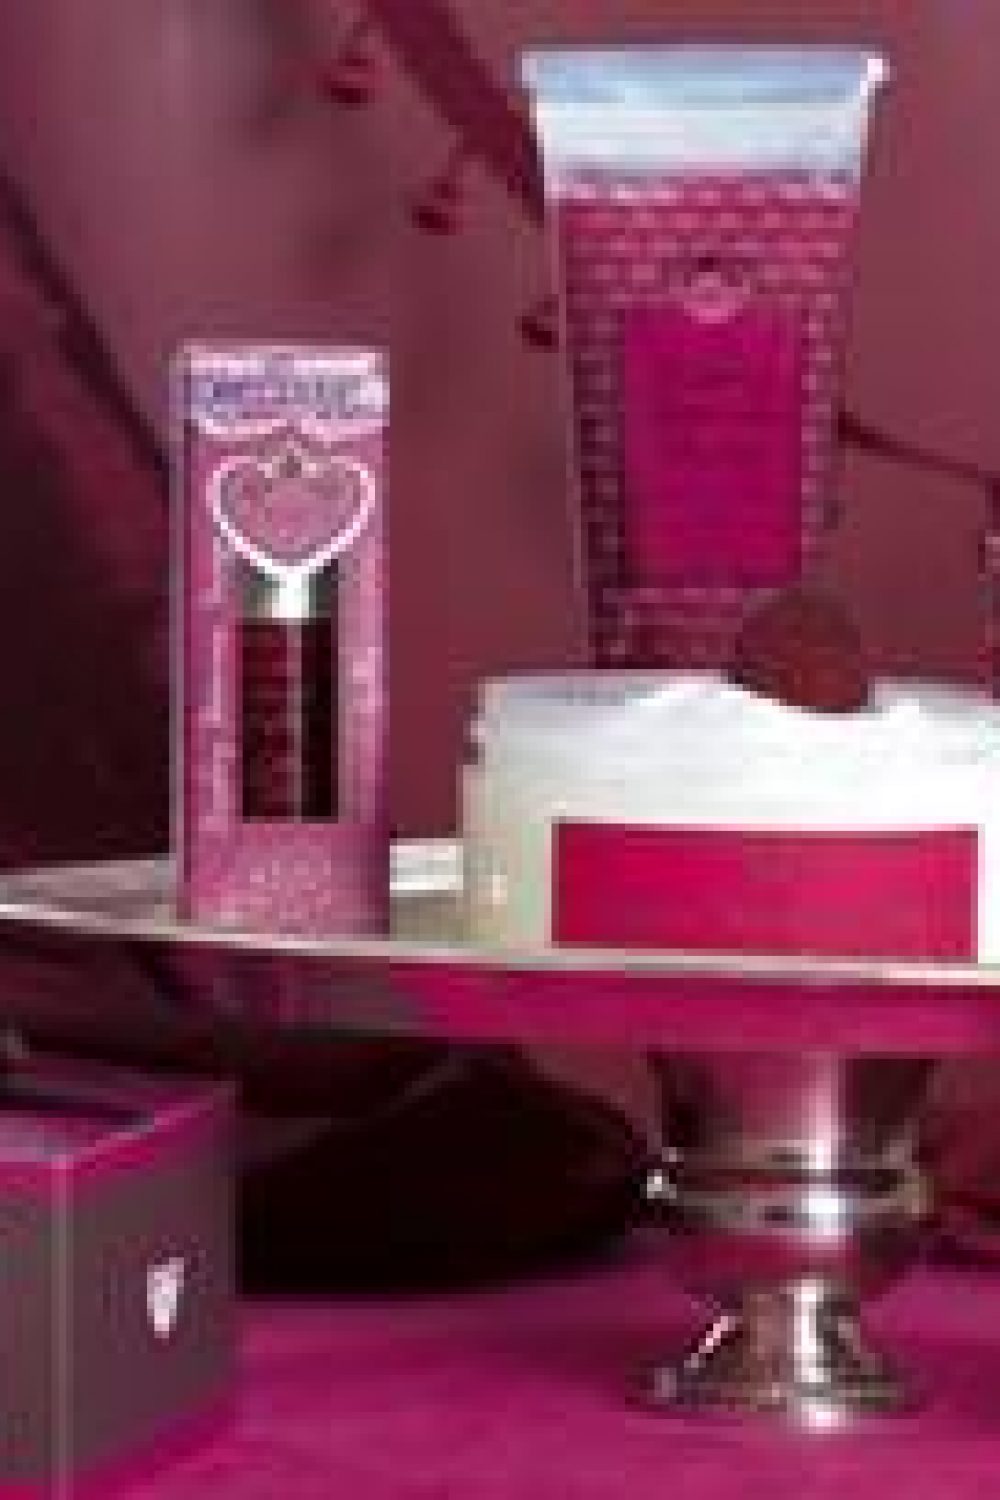 Raspberry Buttercream Frosting Collection by Jaqua…Yum!